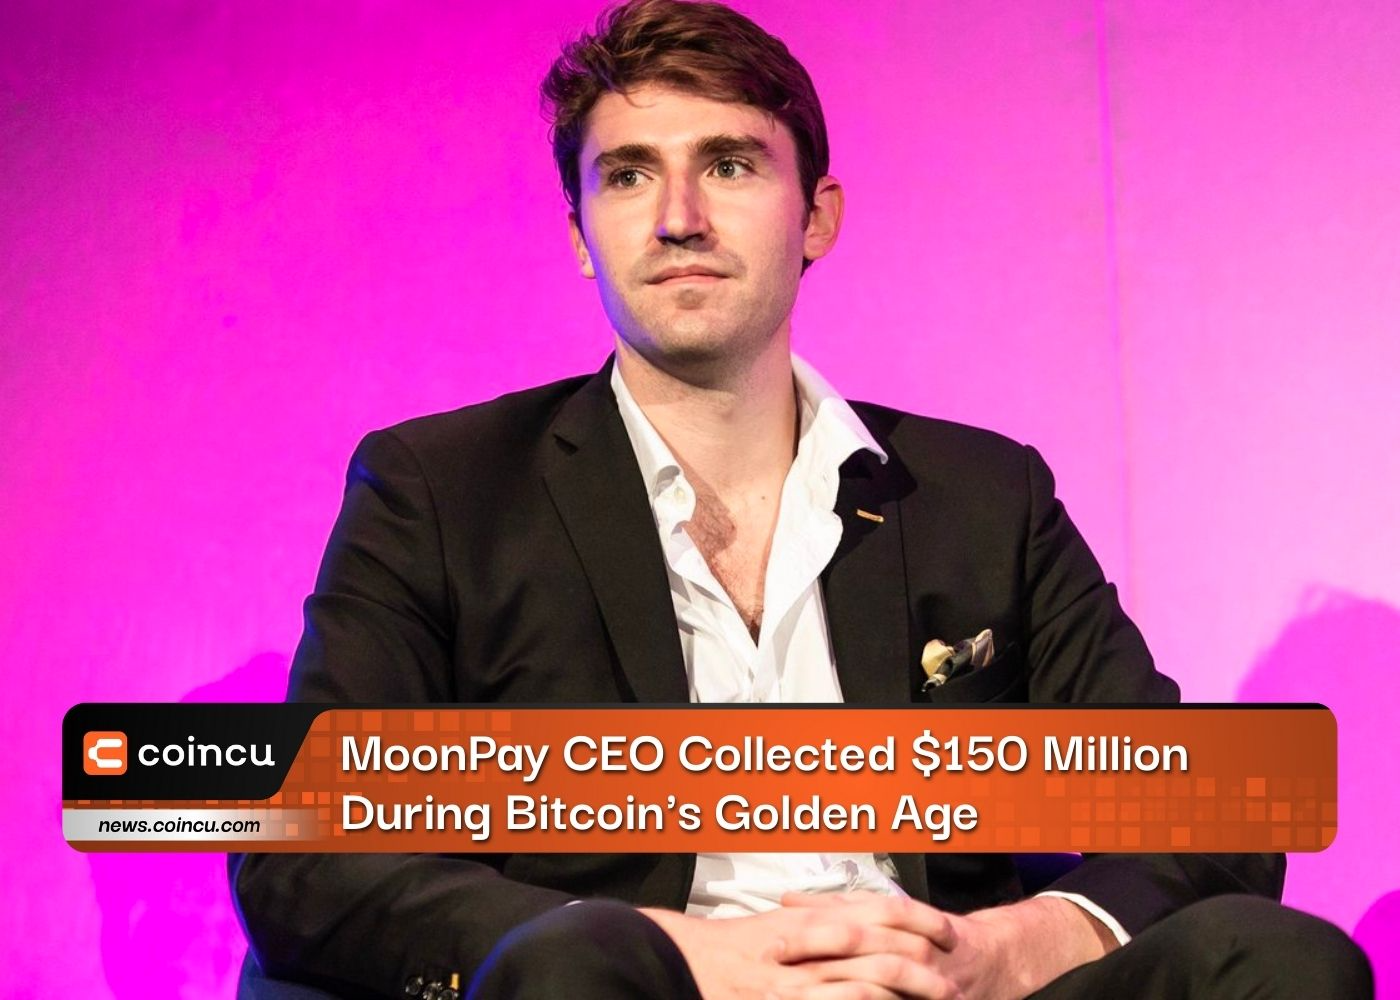 MoonPay CEO Collected $150 Million During Bitcoin's Golden Age